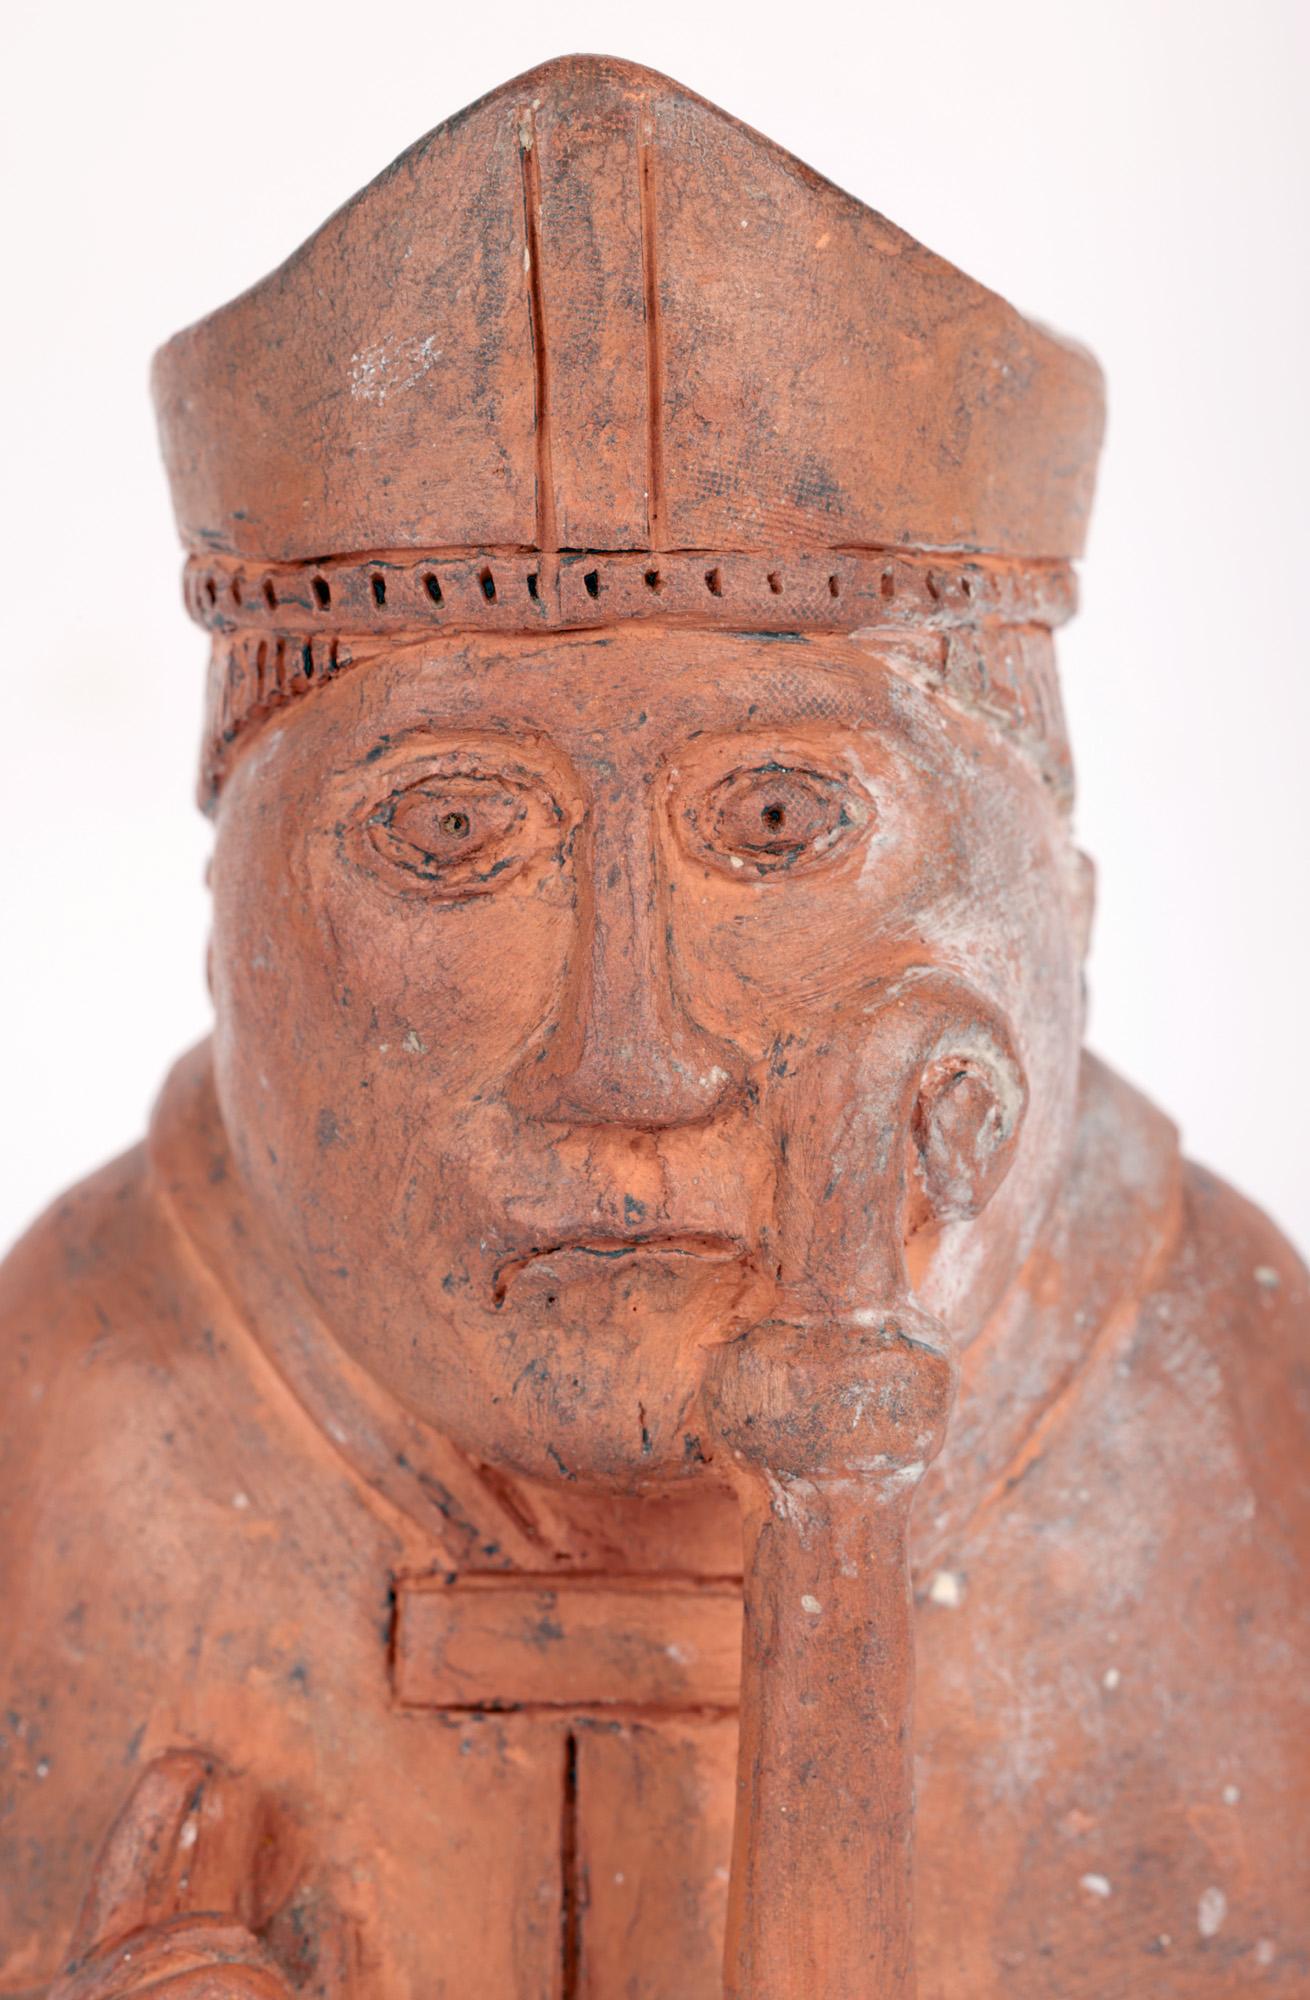 A very unusual Scottish terracotta figure of a Bishop chess piece based on a hoard found on the Isle of Lewis in 1831 and believed to date to the latter 19th or early 20th century. The chess piece portrays a seated bishop dressed in robes and mitre